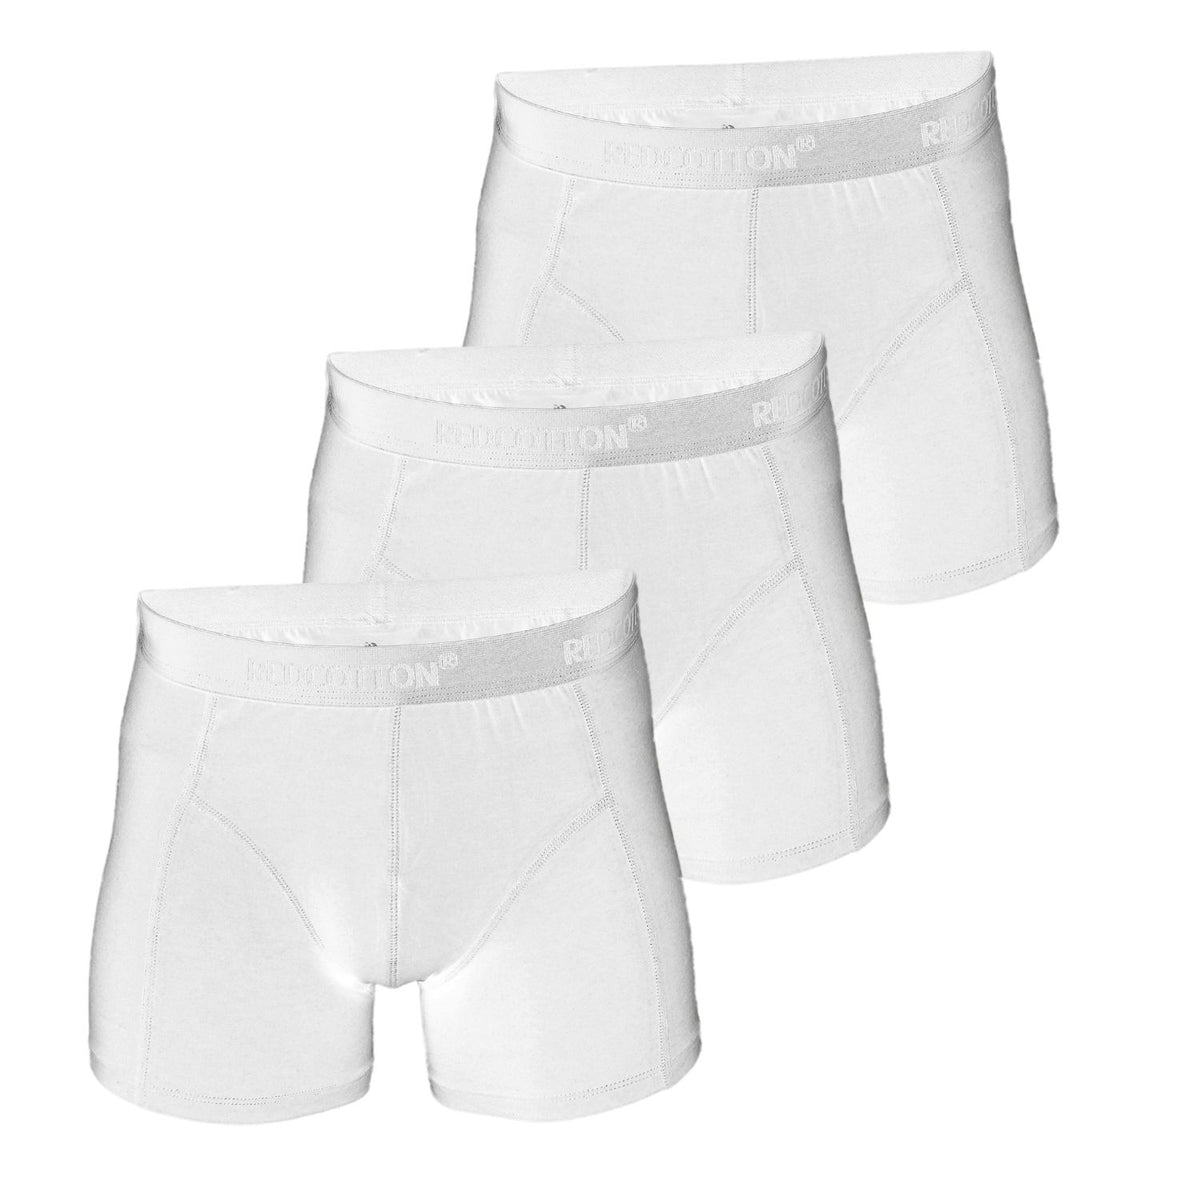 Pack of 3 Men Comfort boxer from redcotton- White